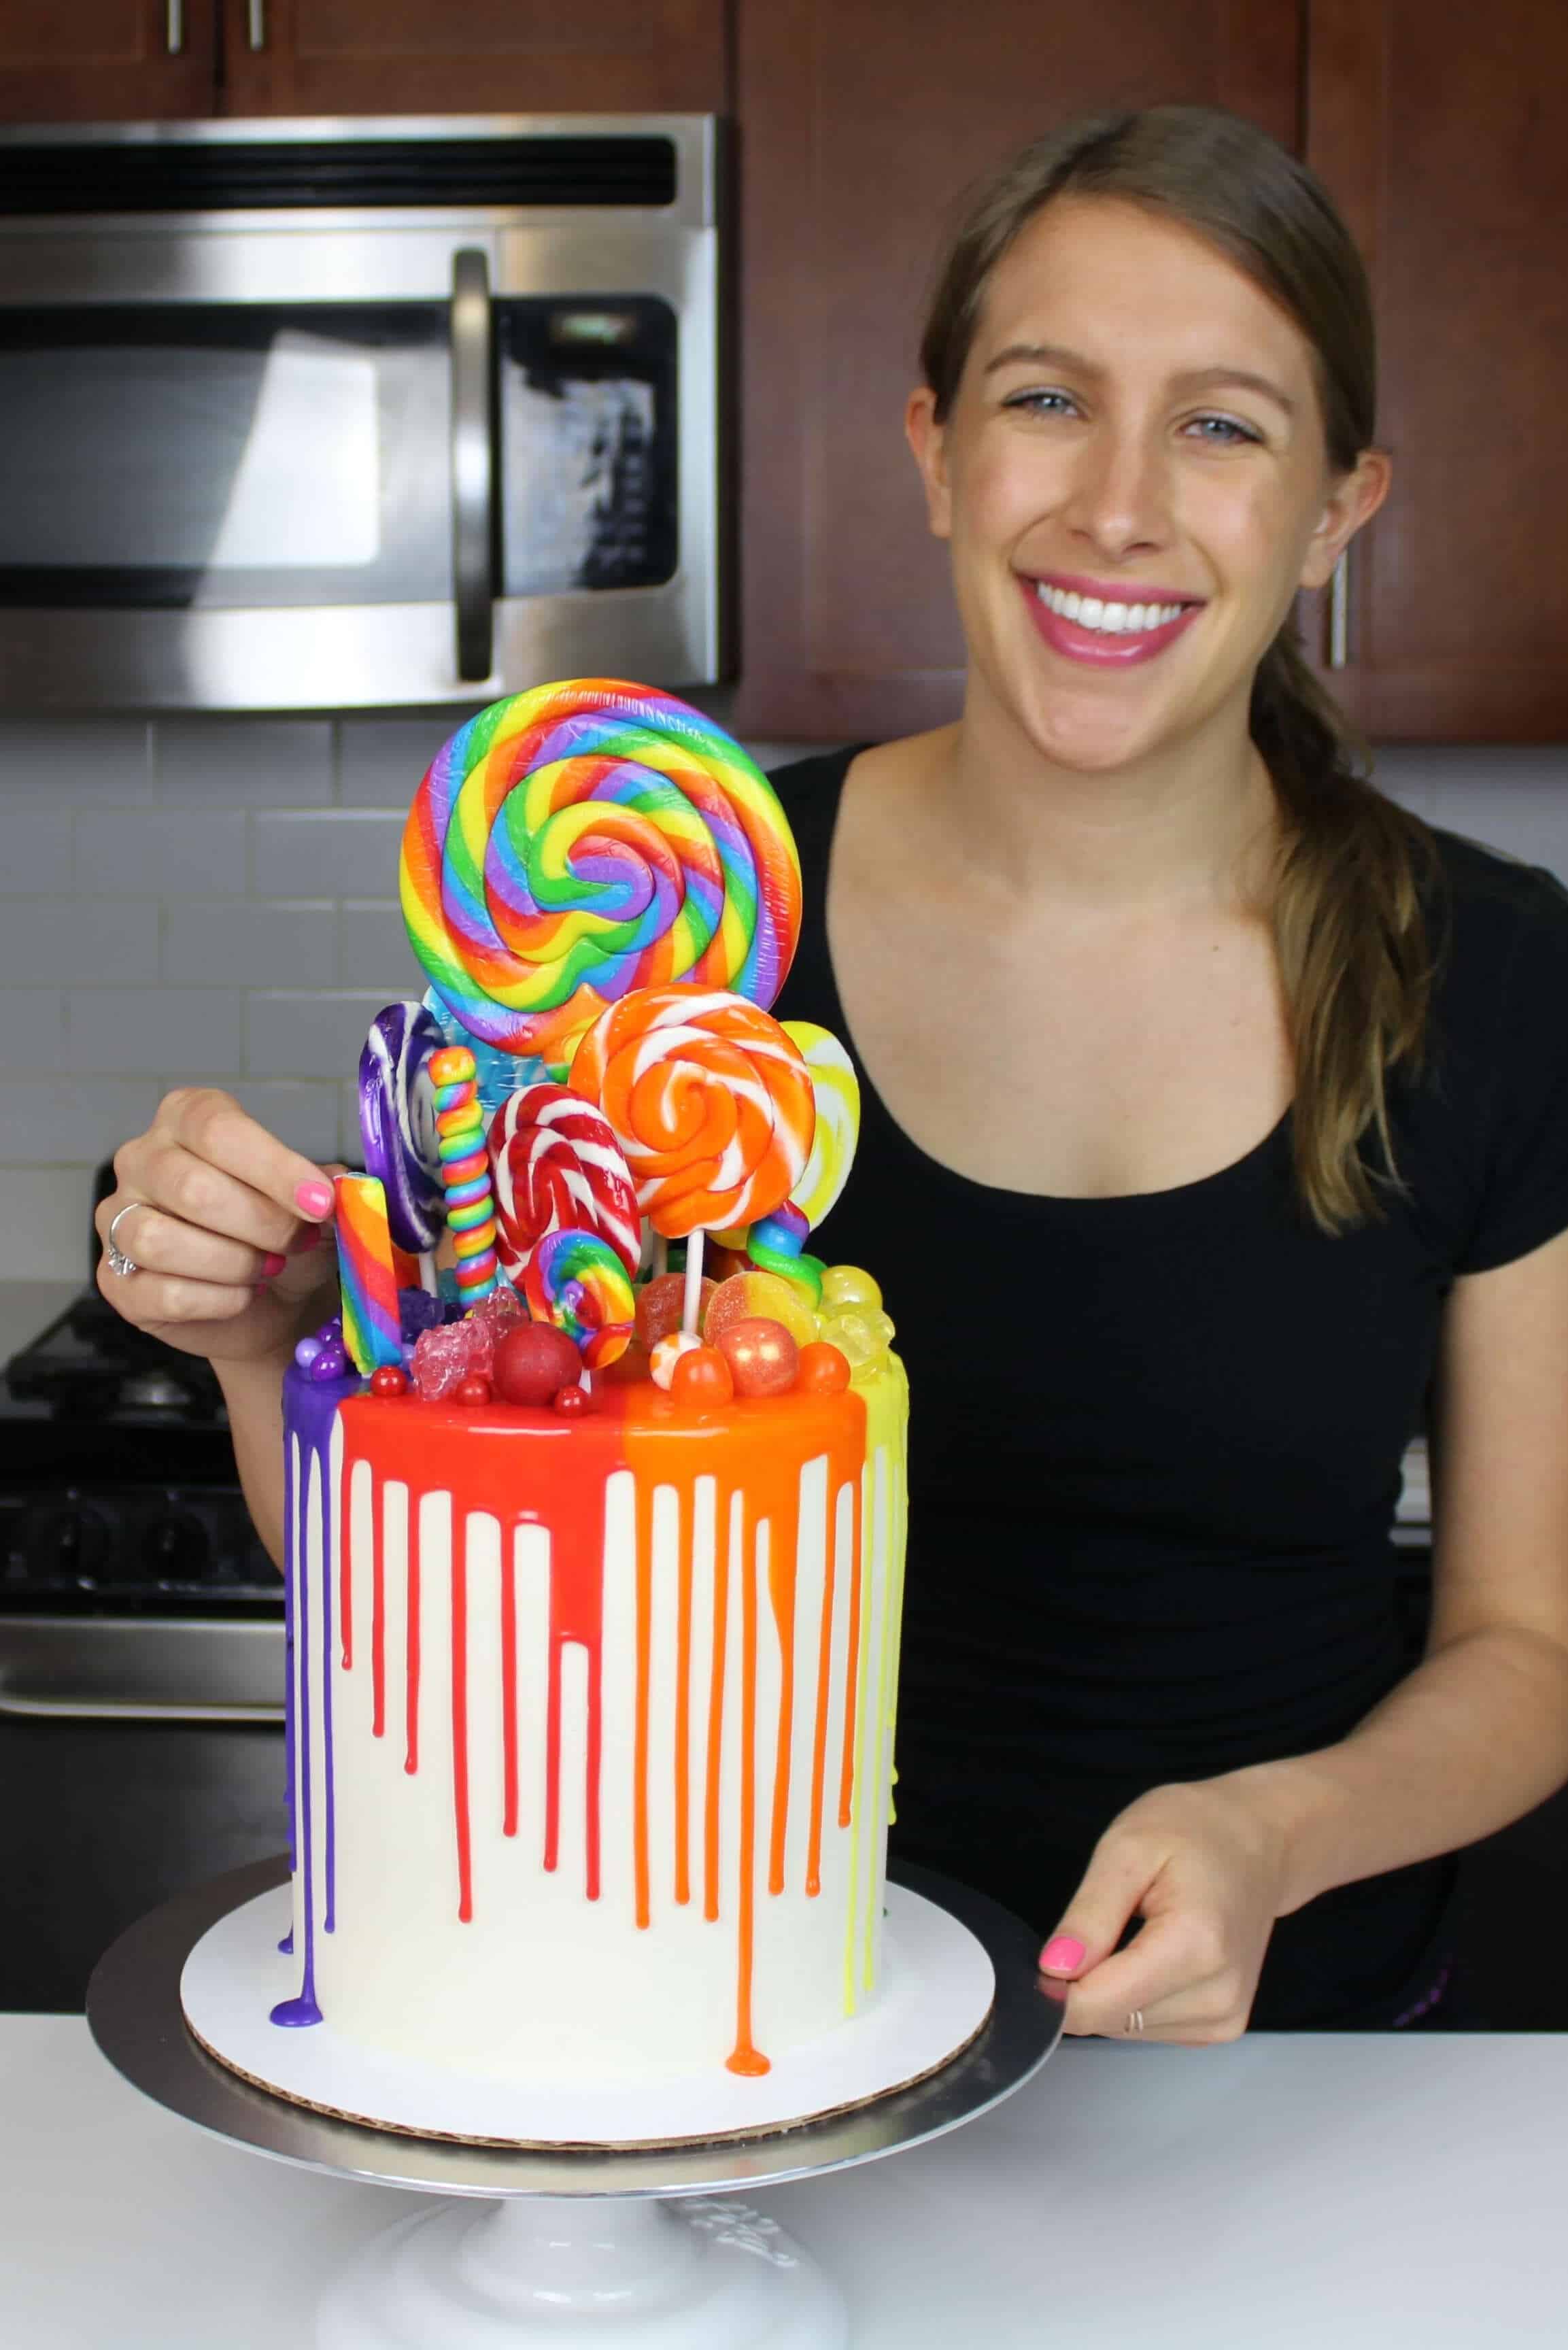 Image of Chelsey White smiling with her rainbow drip cake